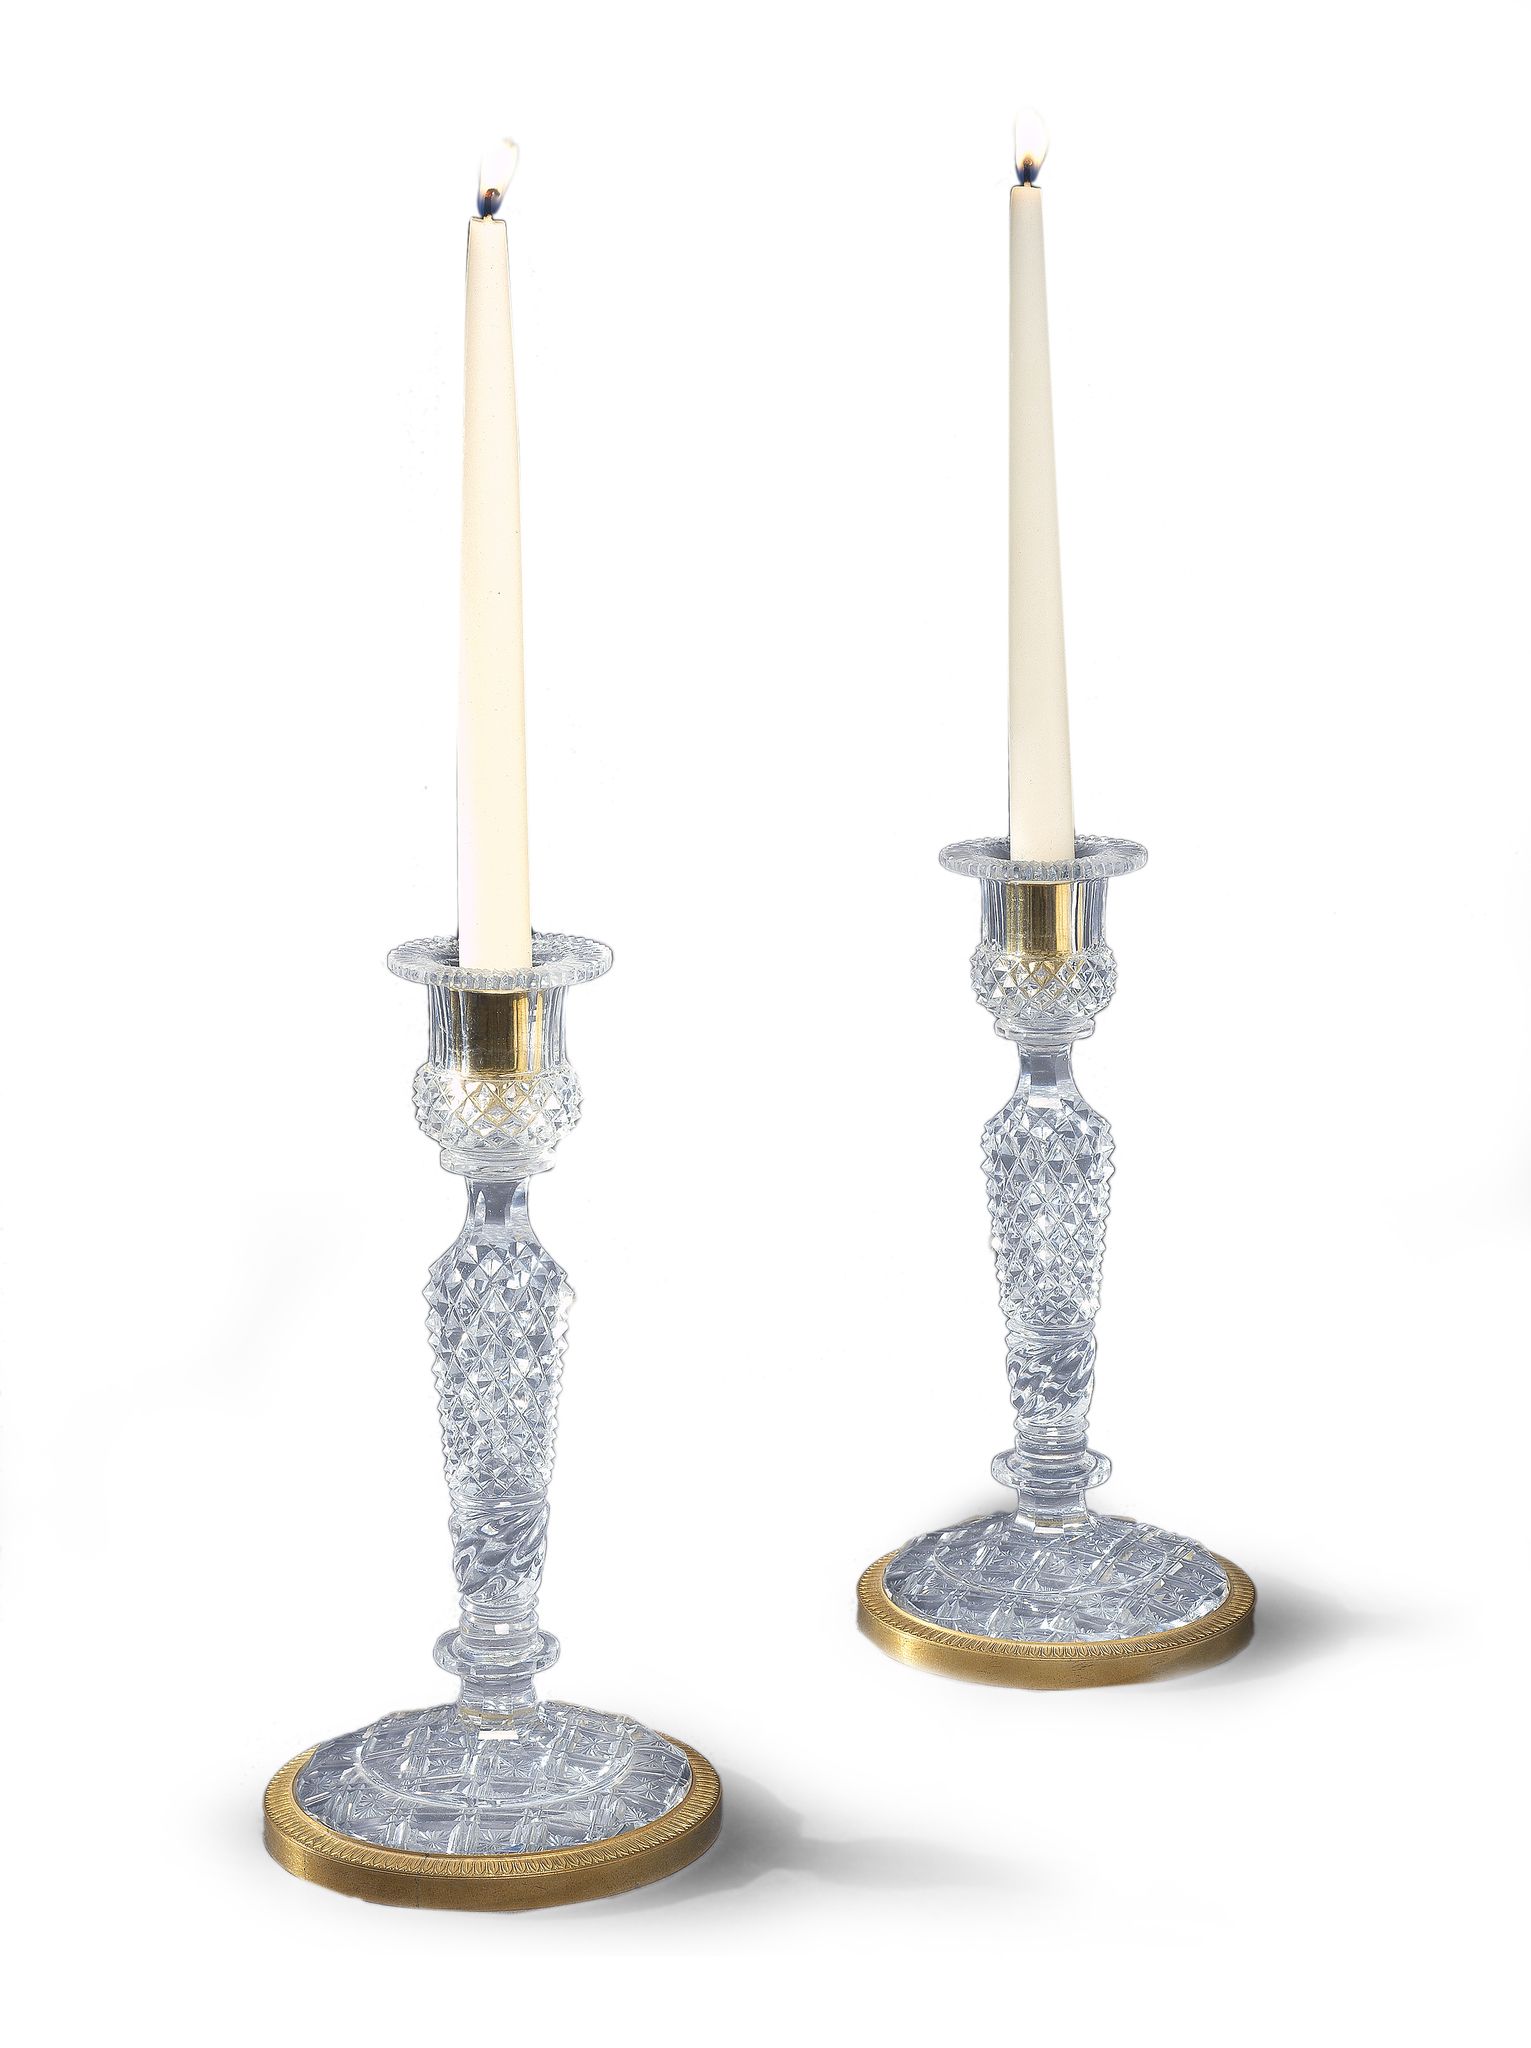 A Pair of Baccarat Glass and Ormolu Candlesticks France circa 1810, the form taking that of a gilt